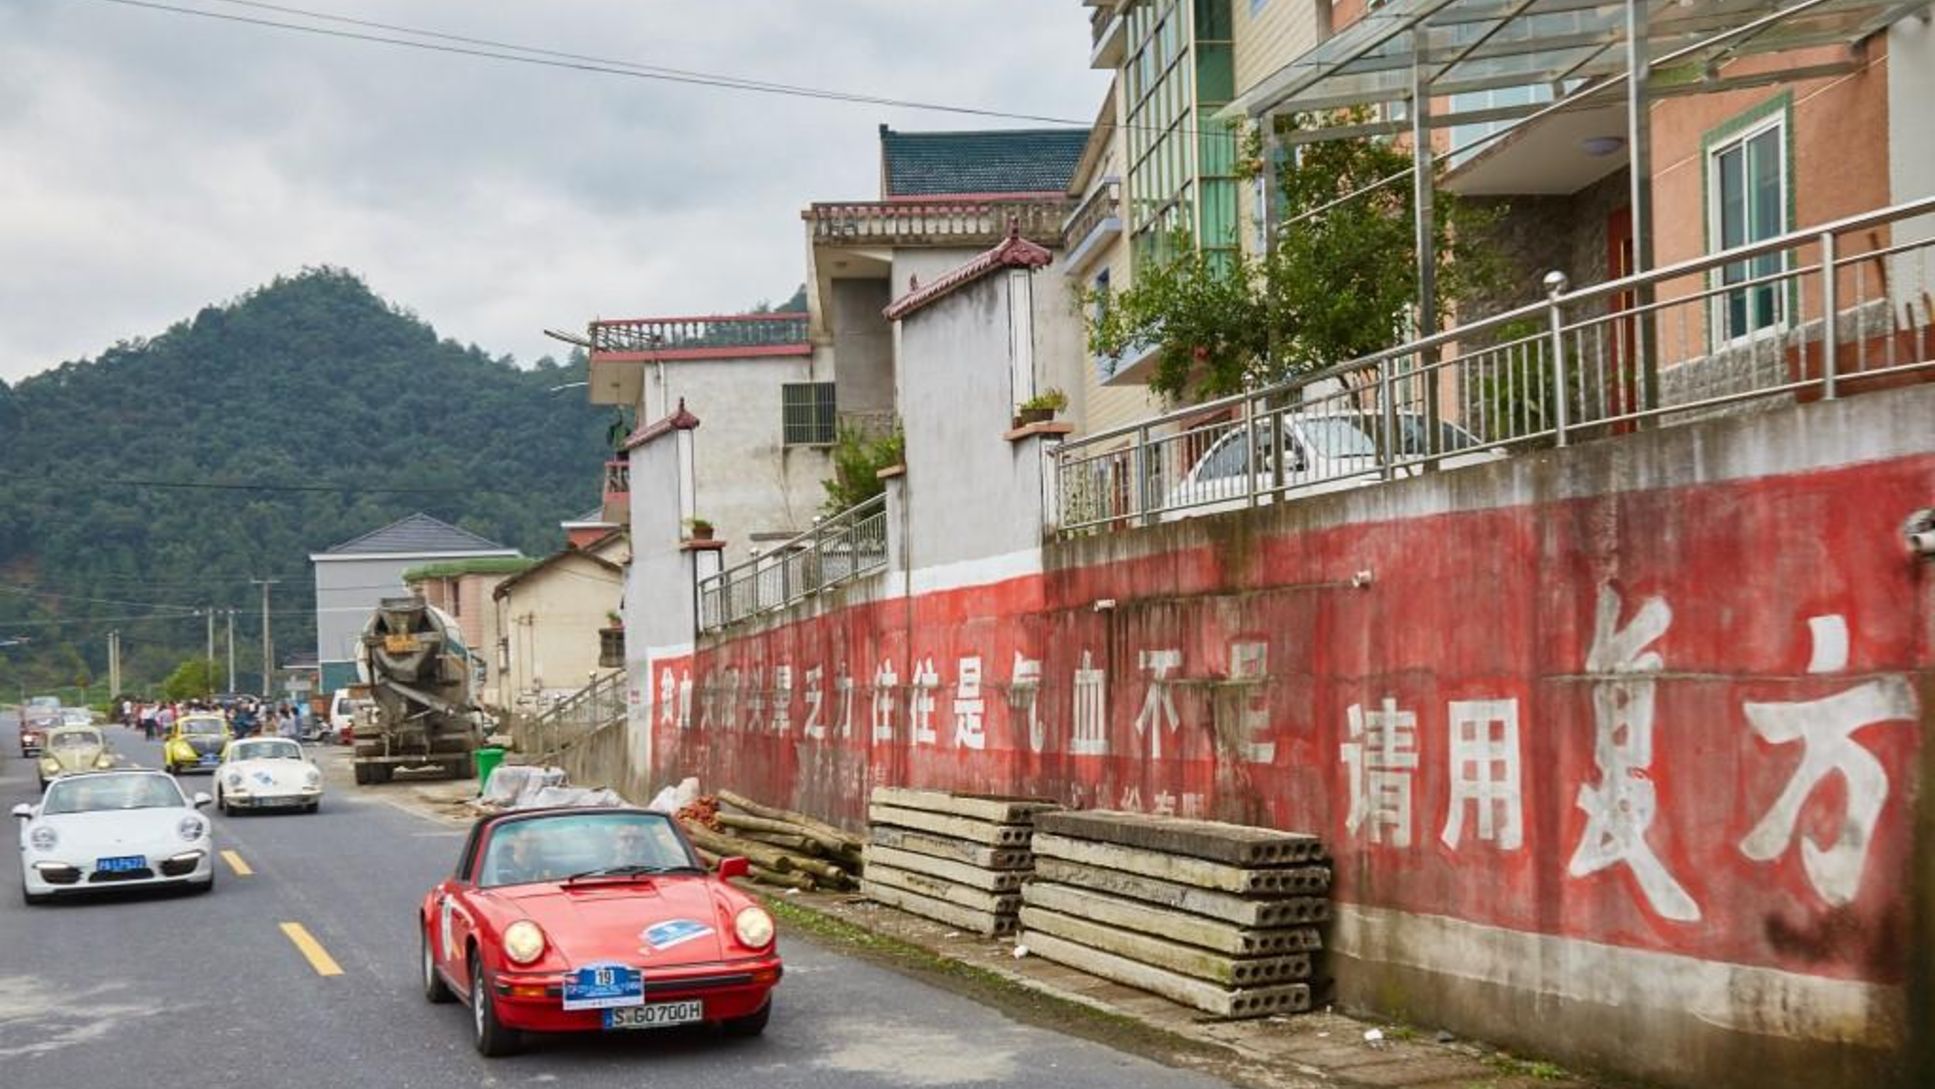 The Top City Classic Rally, China, 2014, Porsche AG